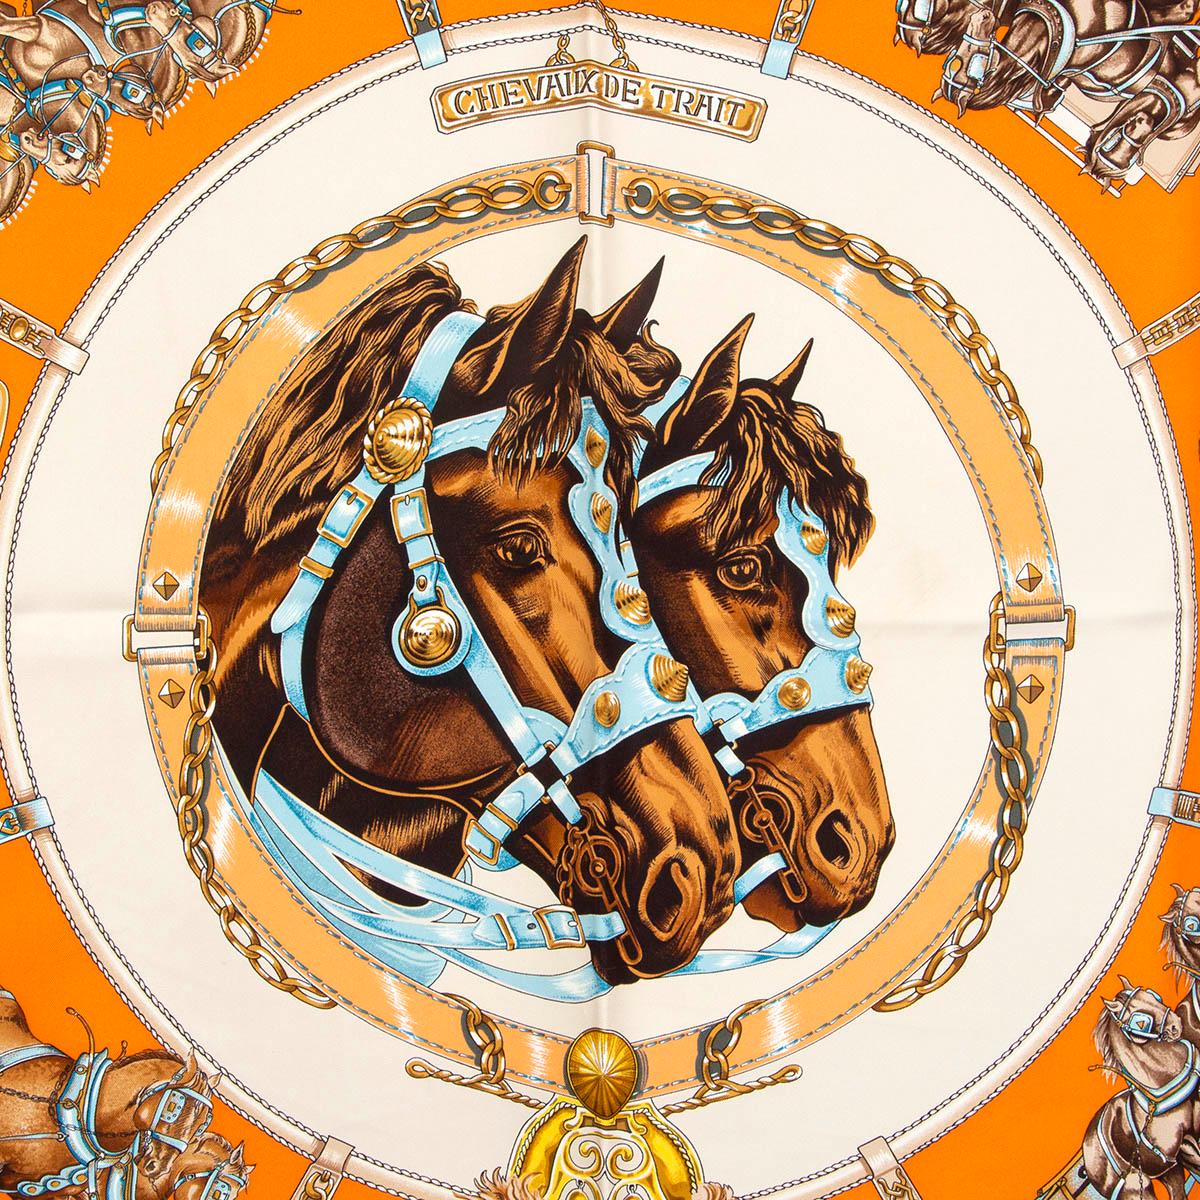 100% authentic Hermès Chevaux de Trait 90 scarf in orange silk twill (100%) with details in gold, light blue and brown. Has been worn and is in excellent condition. First issue in 1993.

Measurements
Width	90cm (35.1in)
Height	90cm (35.1in)

All our